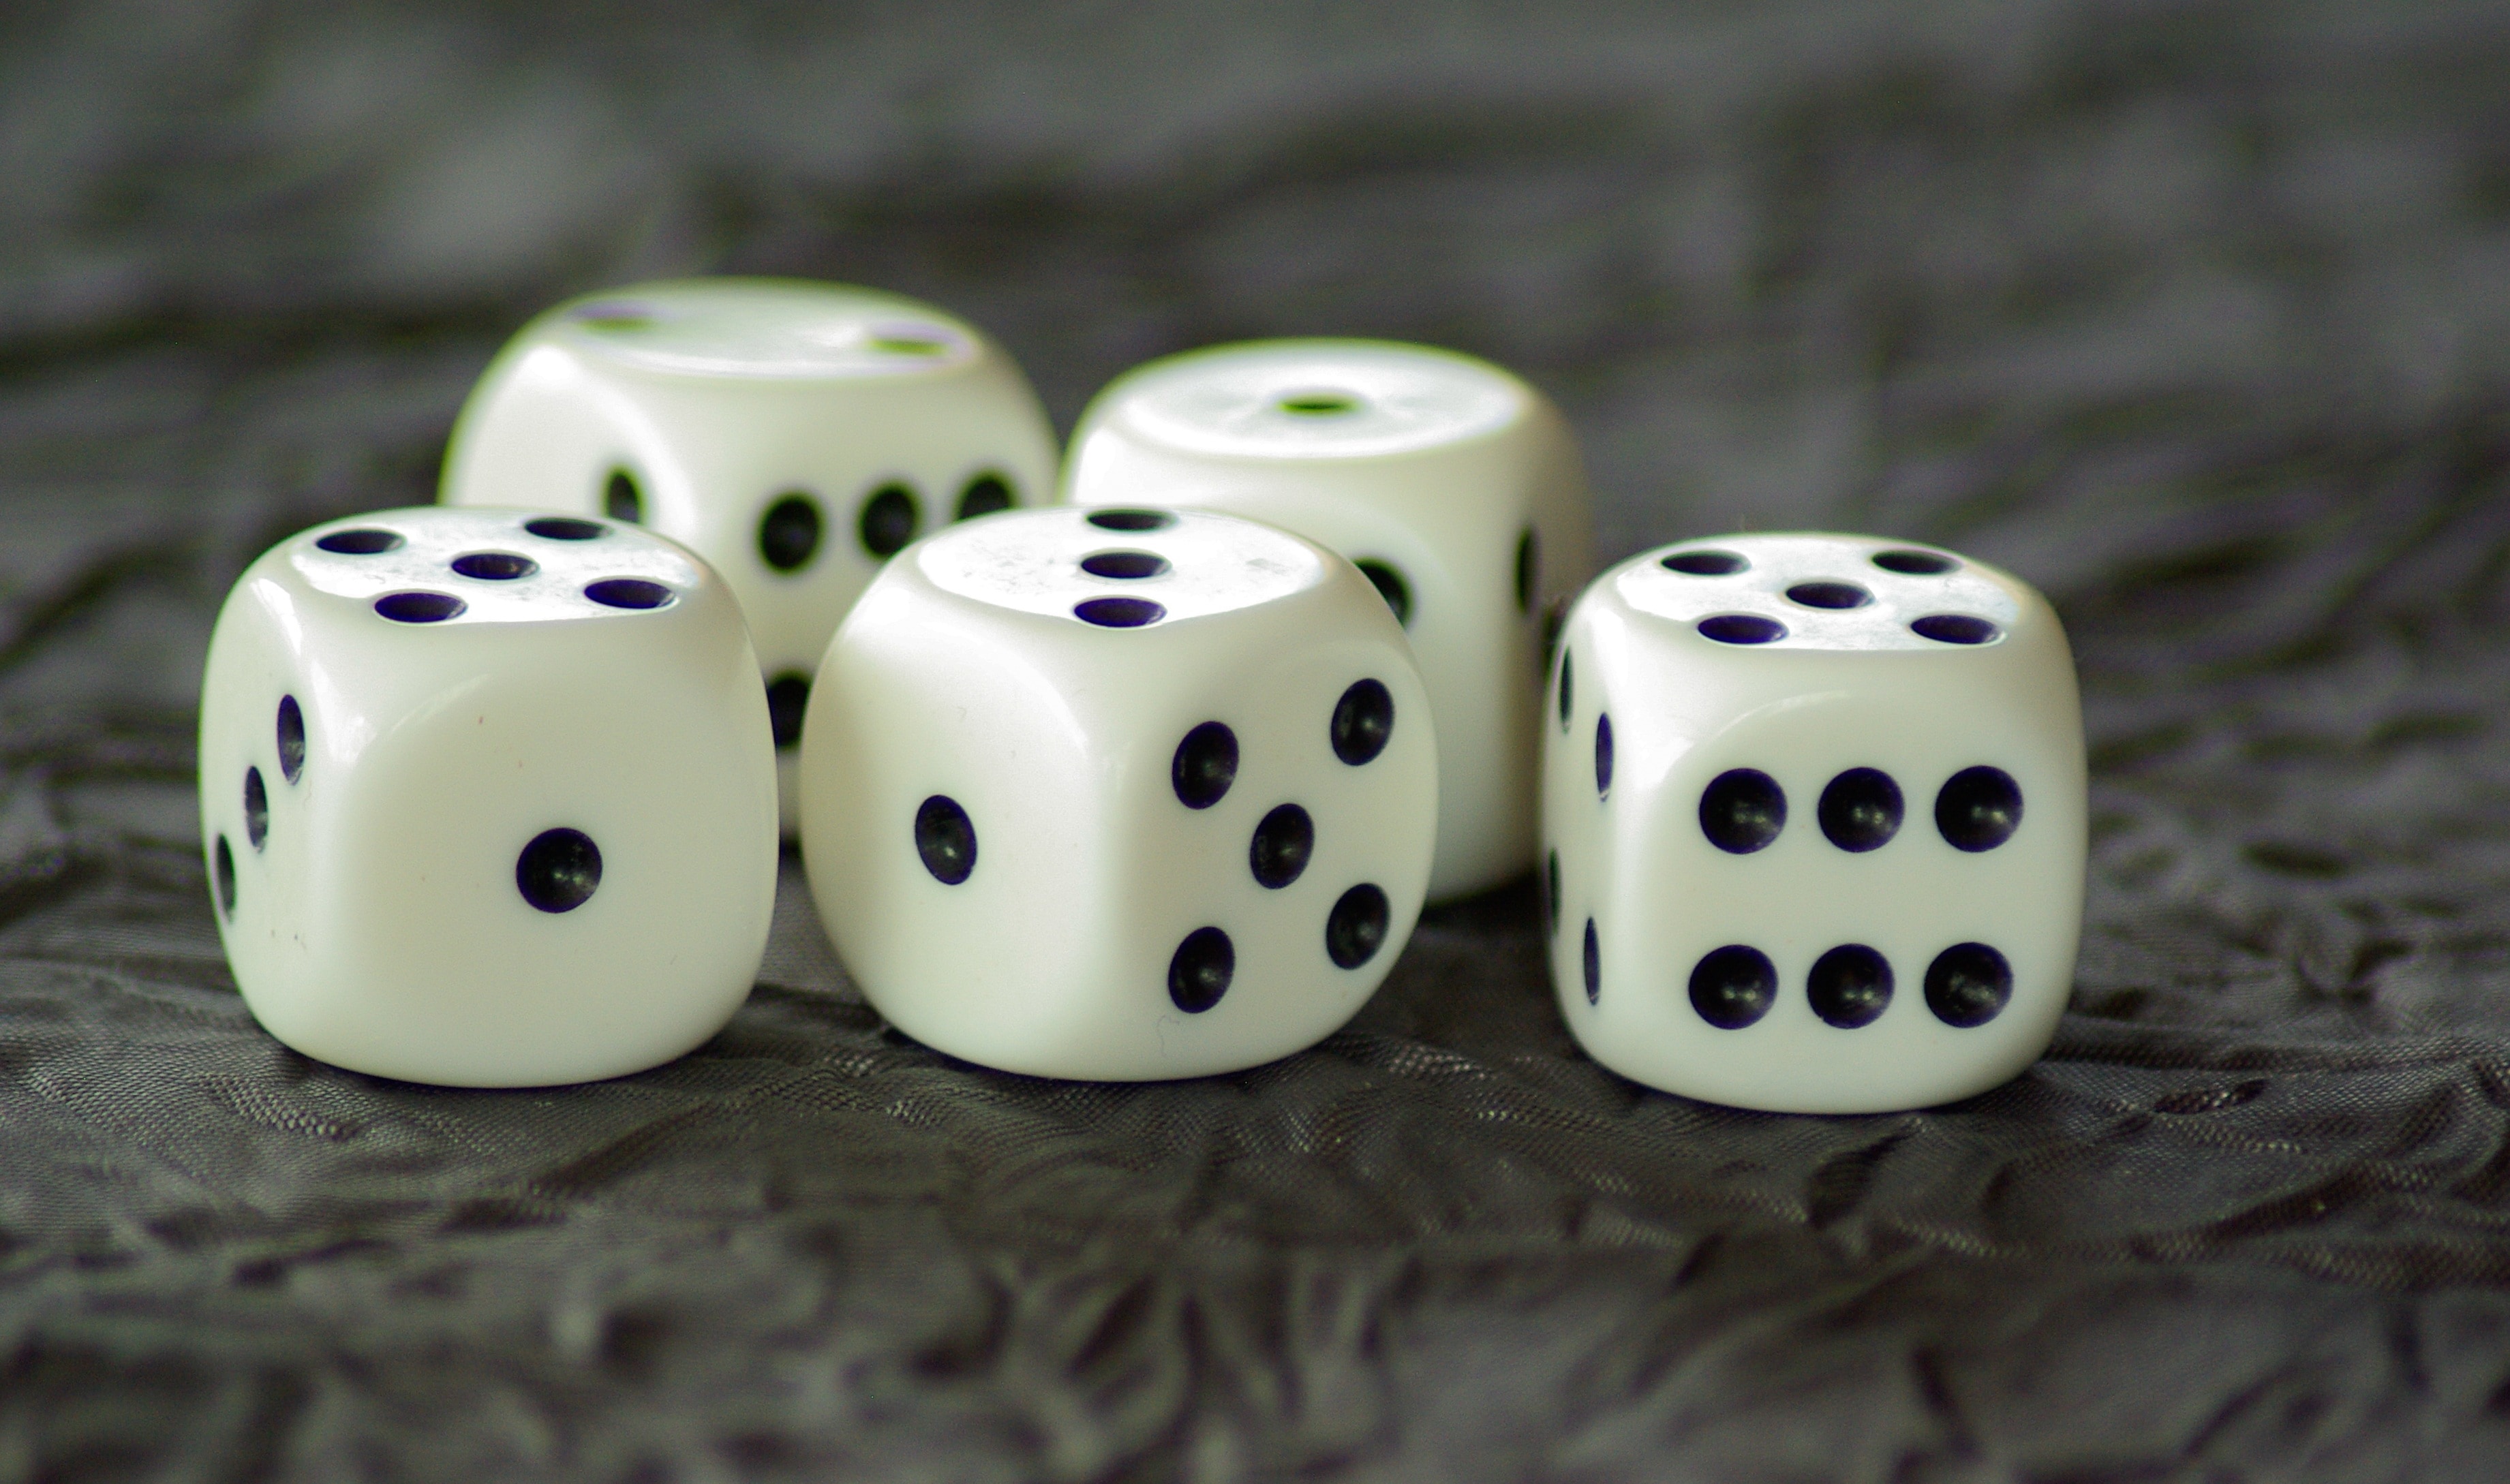 four white and black dice